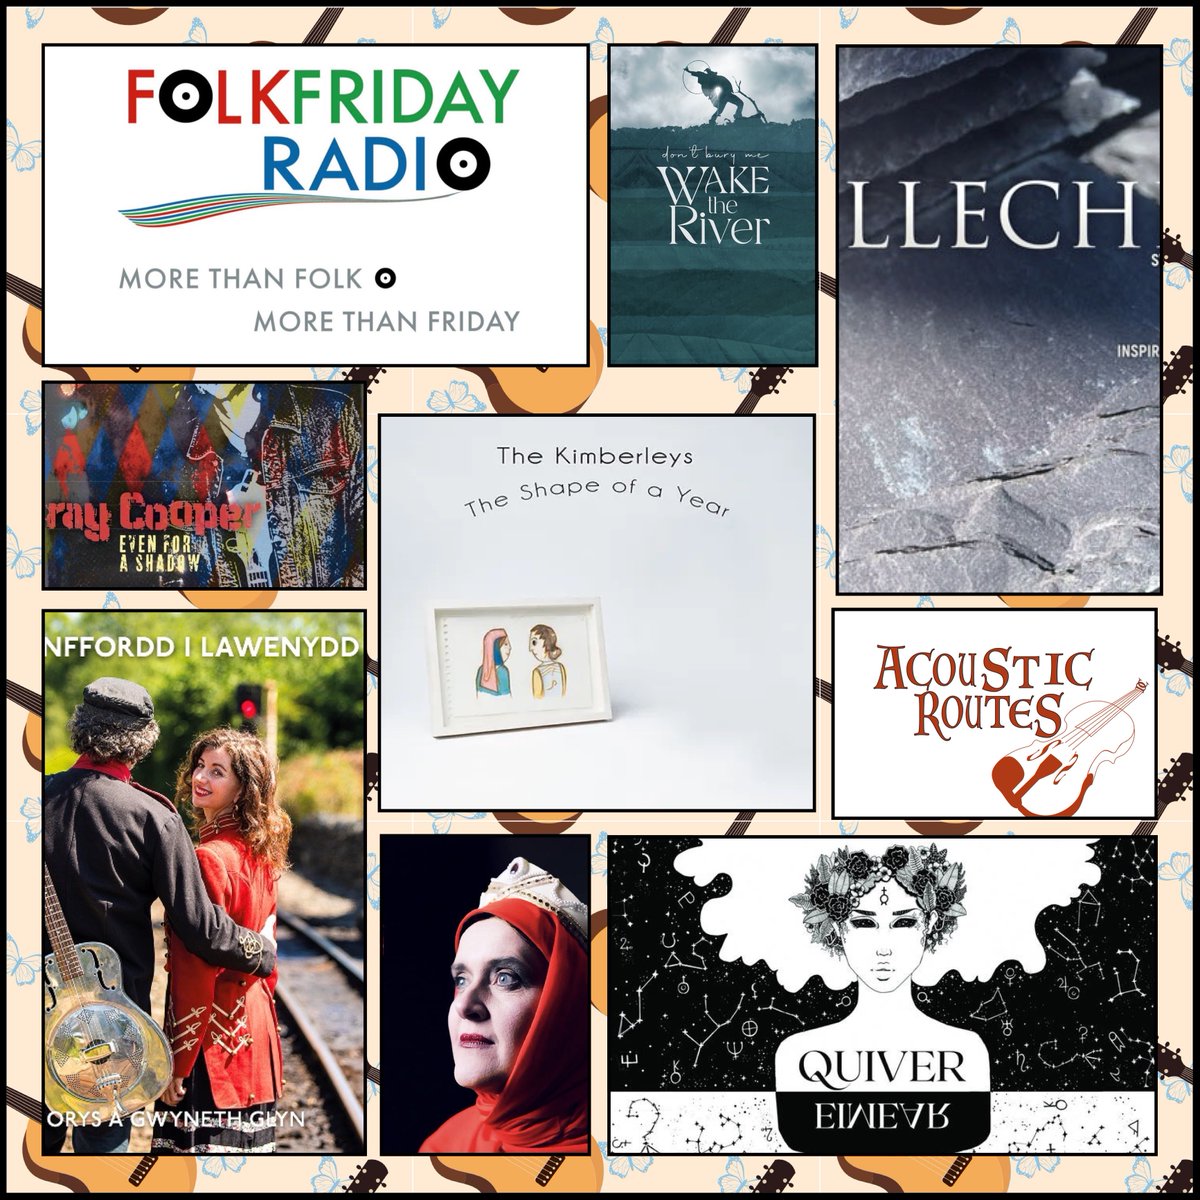 Coming up on @AcousticRoutes show 492, the featured album from @the_kimberleys & music from @twmtrefan a @GwynethGlyn @waketheriver @RaycooperRay @FoxbridgeMusic @StateofUndress @DariaKulesh and @johnacalun Tune in to @folkfridayradio 11pm 🏴󠁧󠁢󠁷󠁬󠁳󠁿🇬🇧 time today folkfridayradio.com